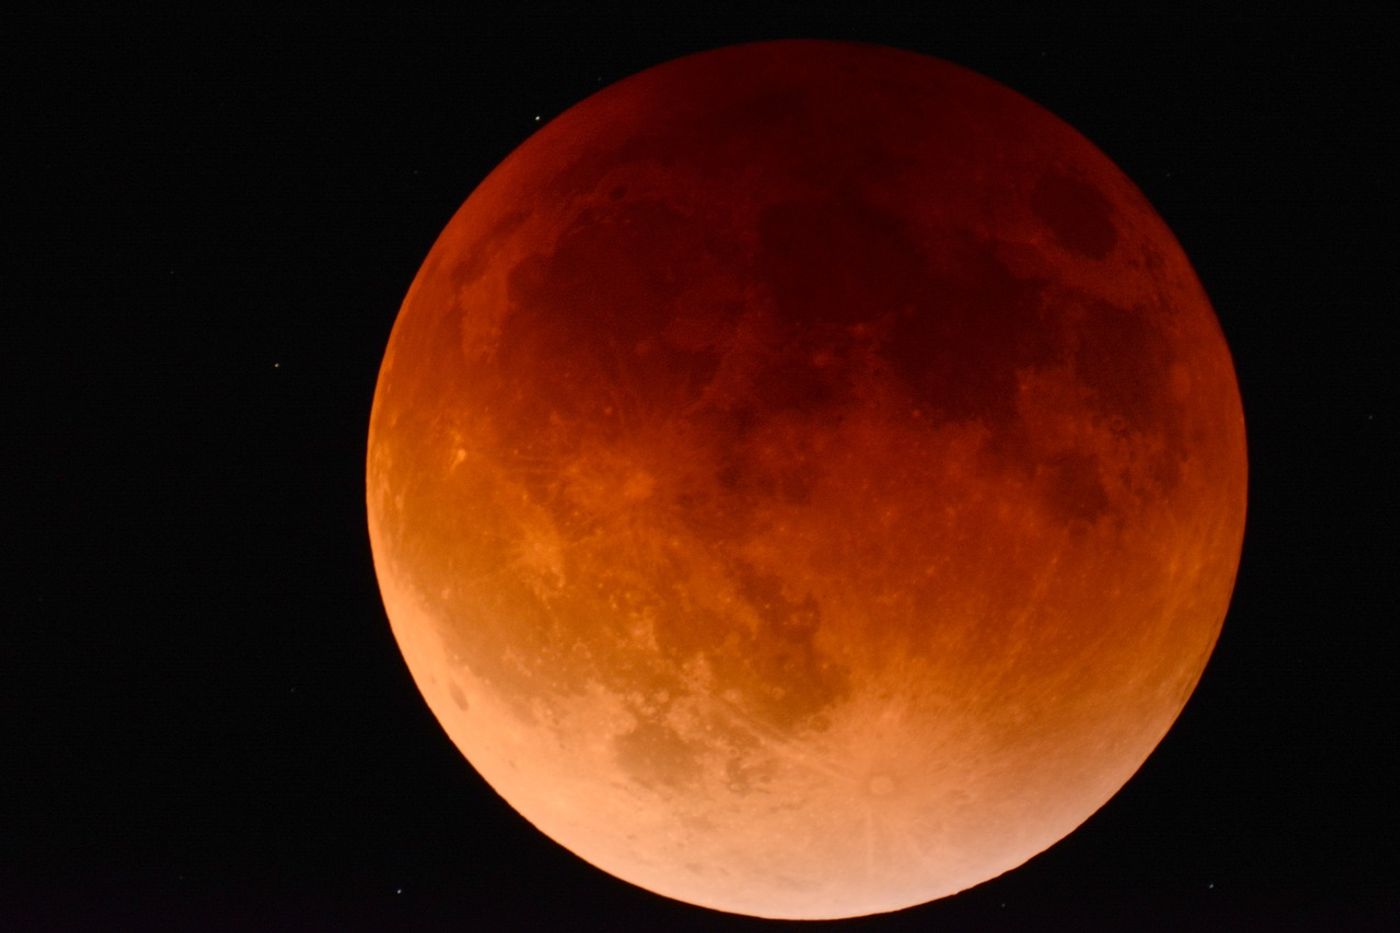 This picture depicts a Blood Moon, which happens when the Earth blocks the Sun's light from reaching the lunar surface.